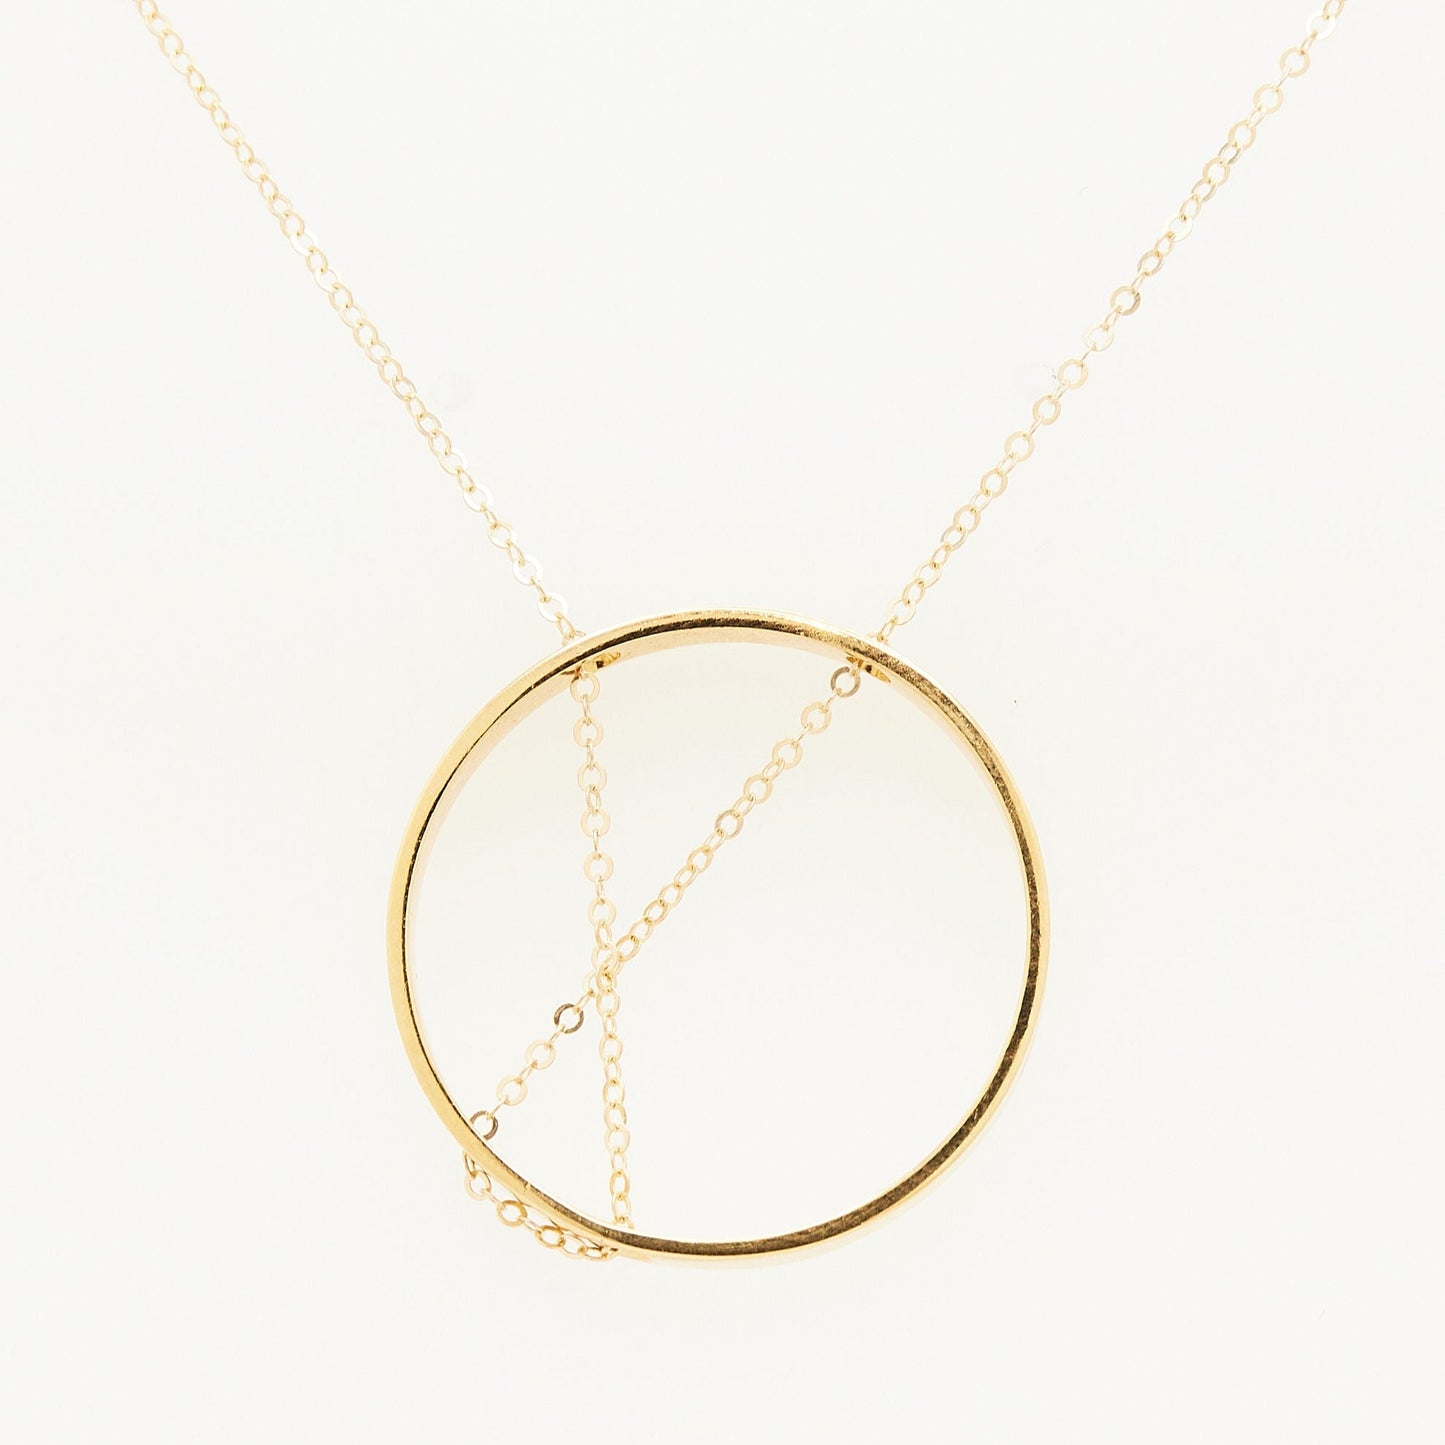 Load image into Gallery viewer, gold open circle pendant with gold chain threaded through on white background
